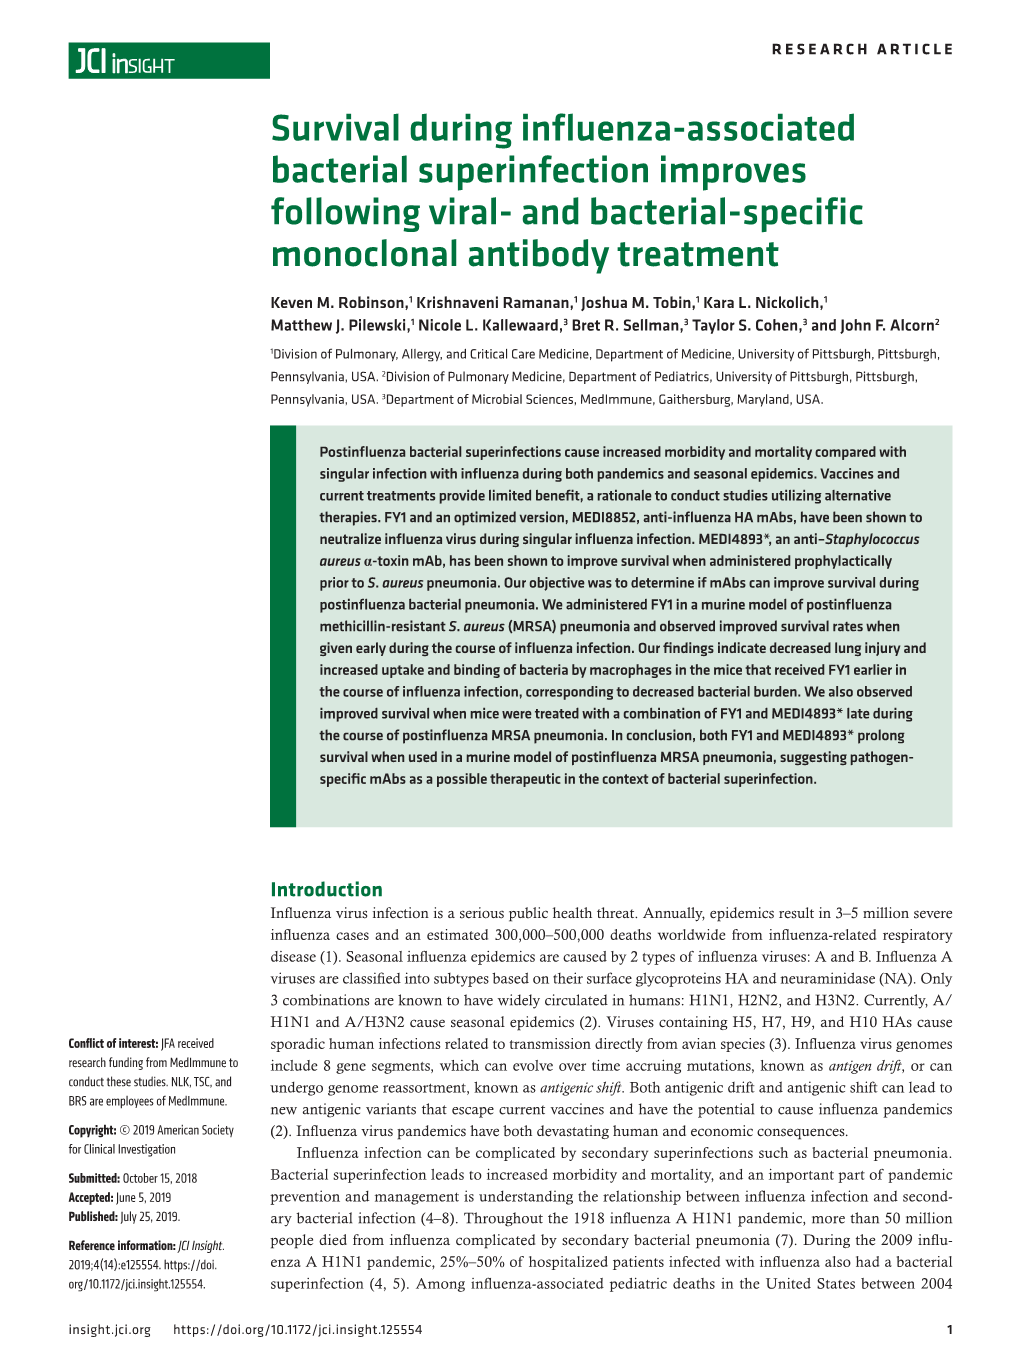 Survival During Influenza-Associated Bacterial Superinfection Improves Following Viral- and Bacterial-Specific Monoclonal Antibody Treatment